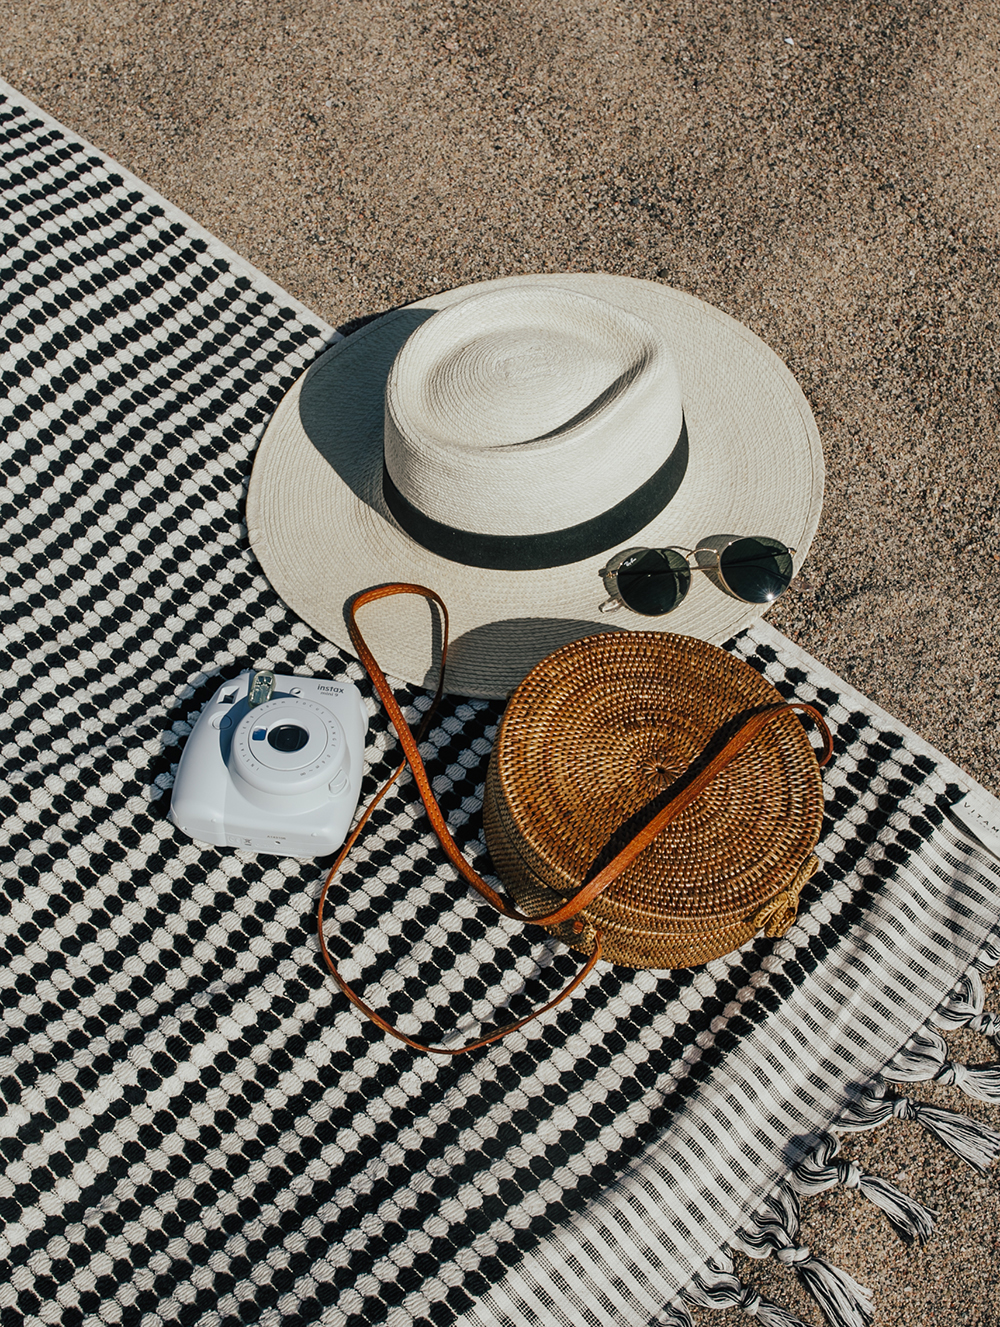 livvyland-blog-olivia-watson-fashion-travel-blogger-shop-spring-solid-and-striped-sophia-one-piece-swimsuit-periwinkle-blue-costa-brava-pals-beach-barecelona-spain-1